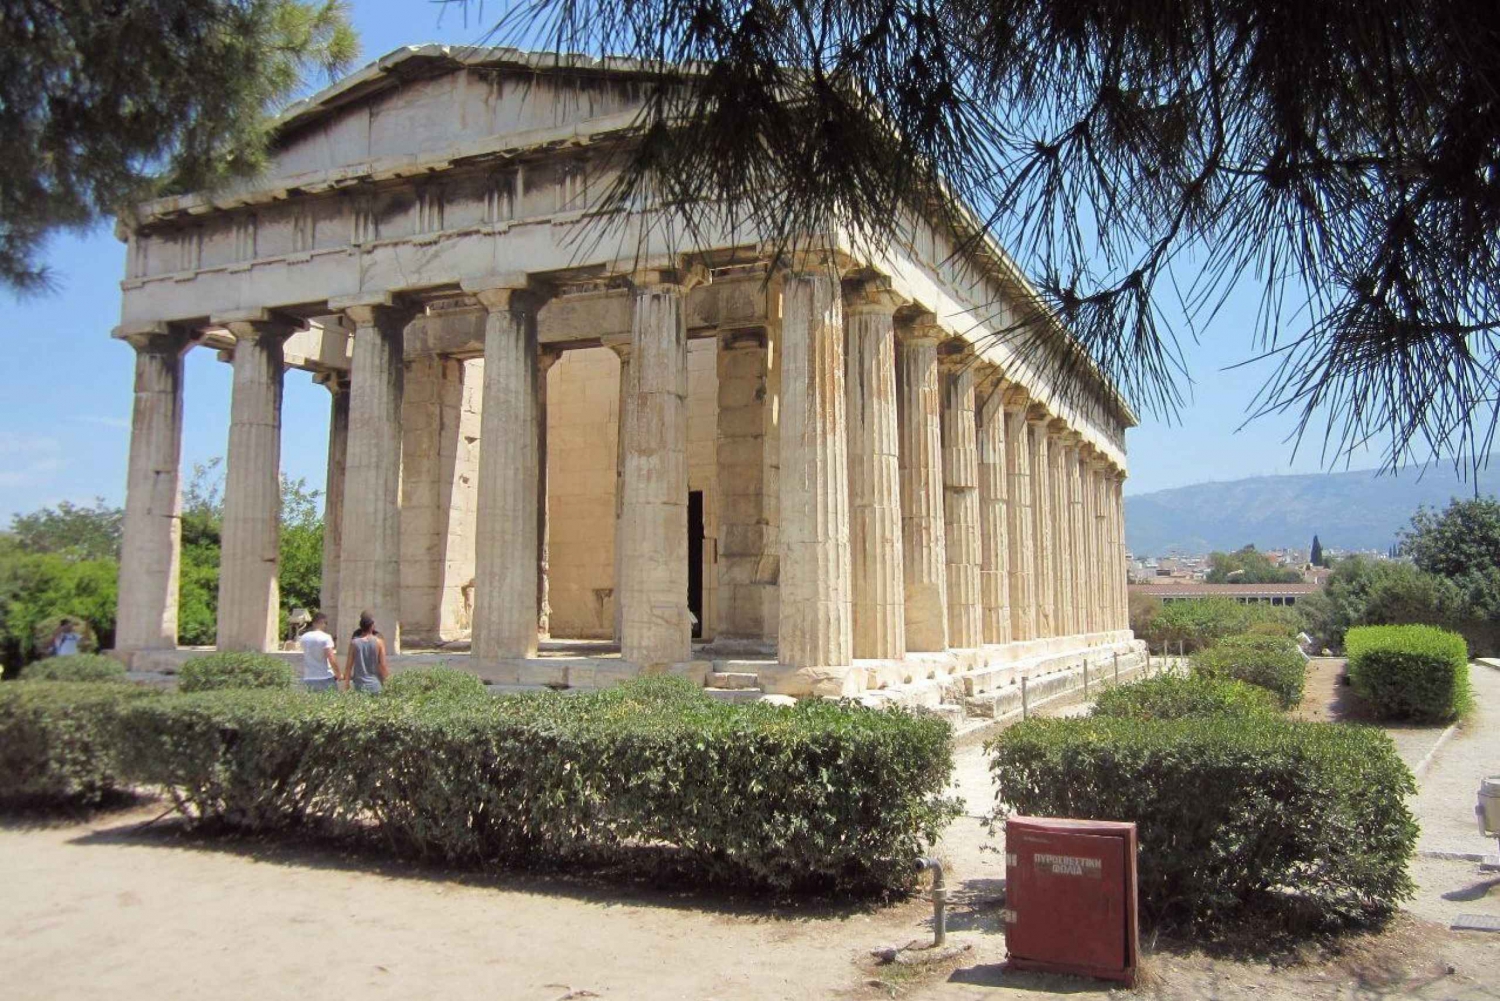 Athens: Audioguide For an Adventure Through 11 Ancient Sites